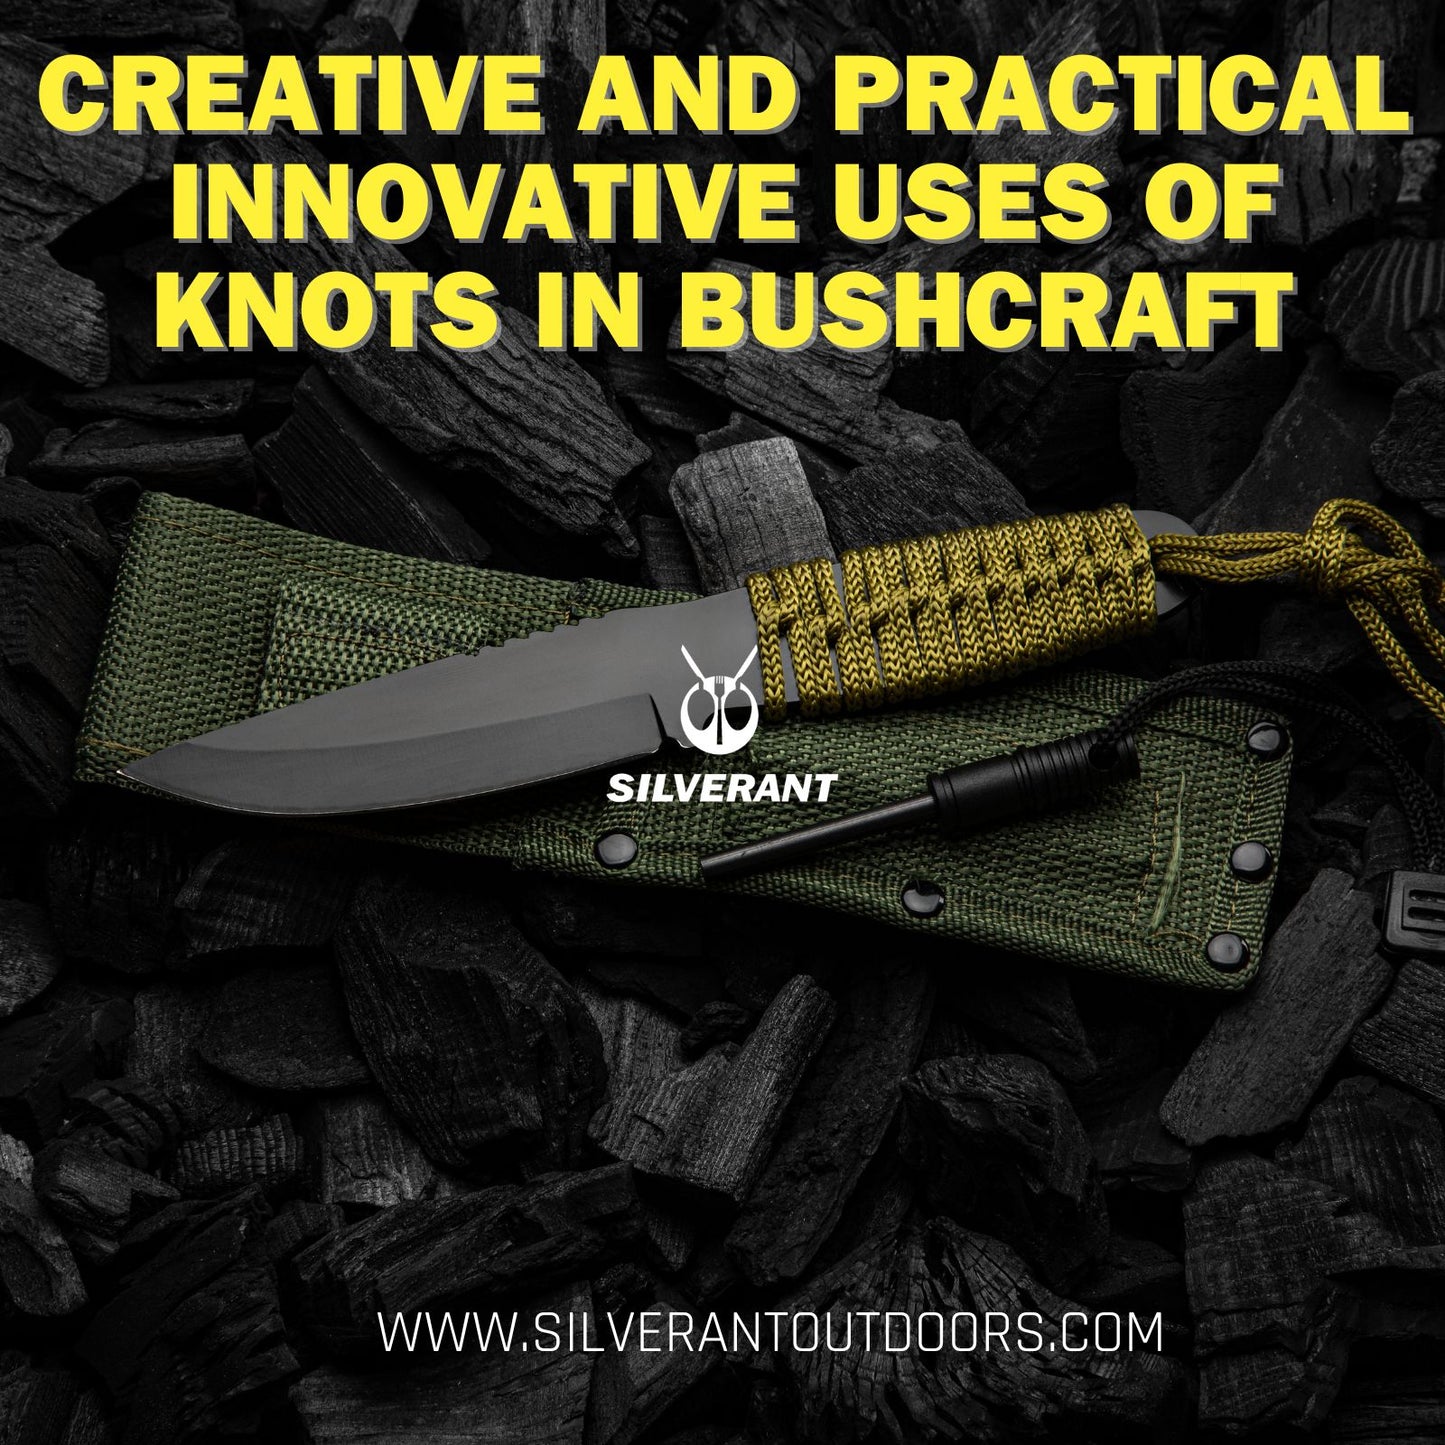 Creative and Practical: Innovative Uses of Knots in Bushcraft